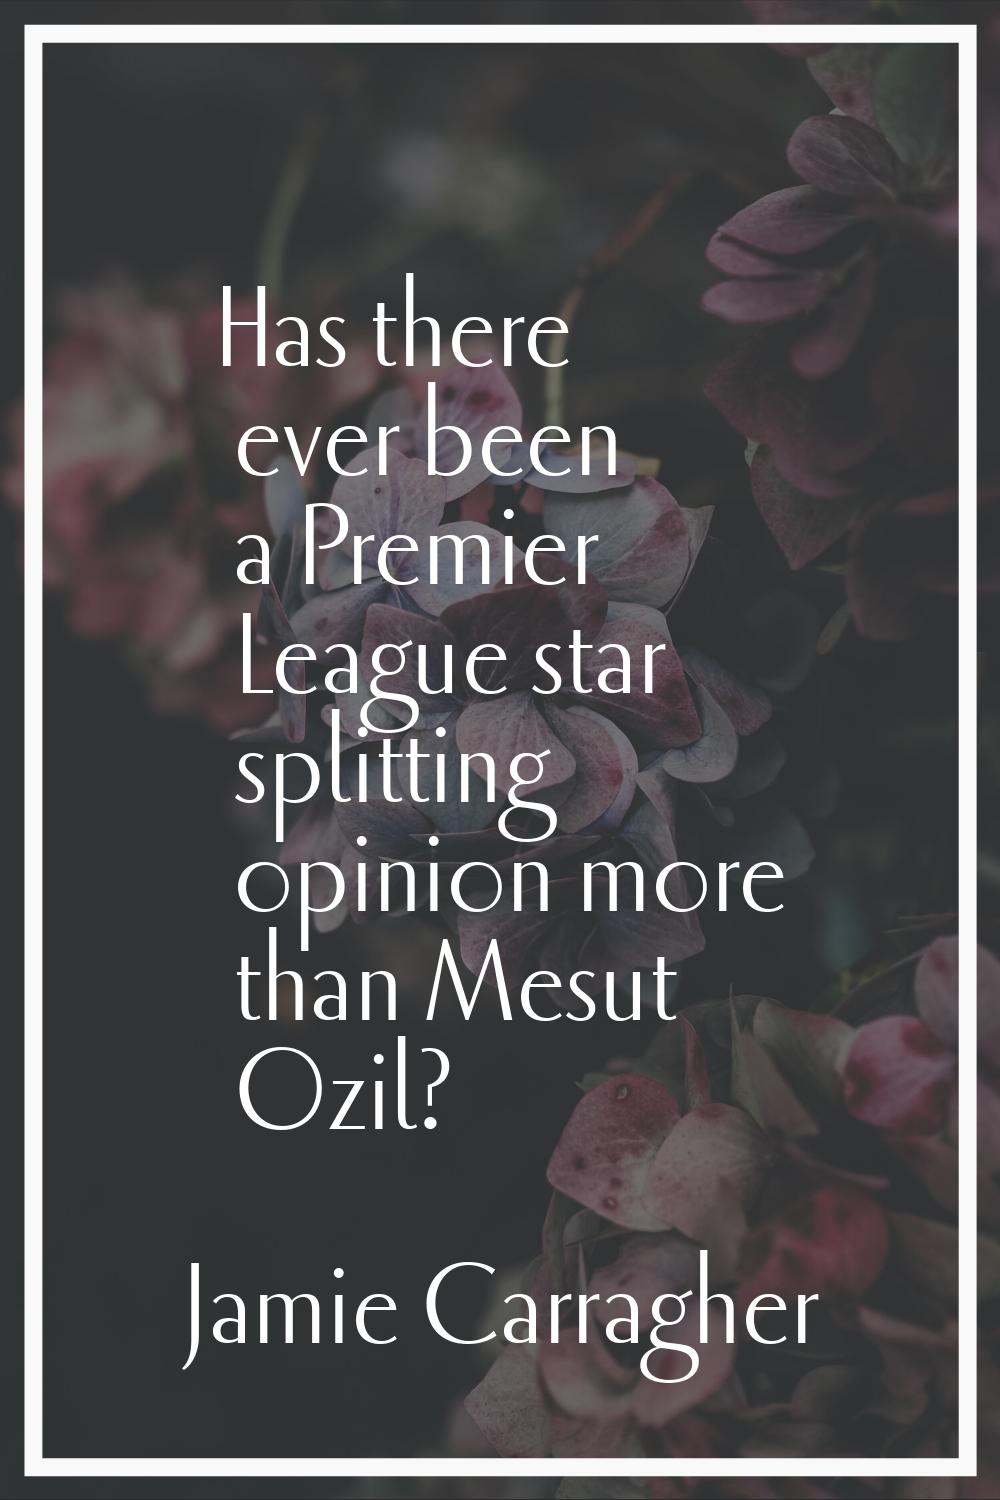 Has there ever been a Premier League star splitting opinion more than Mesut Ozil?